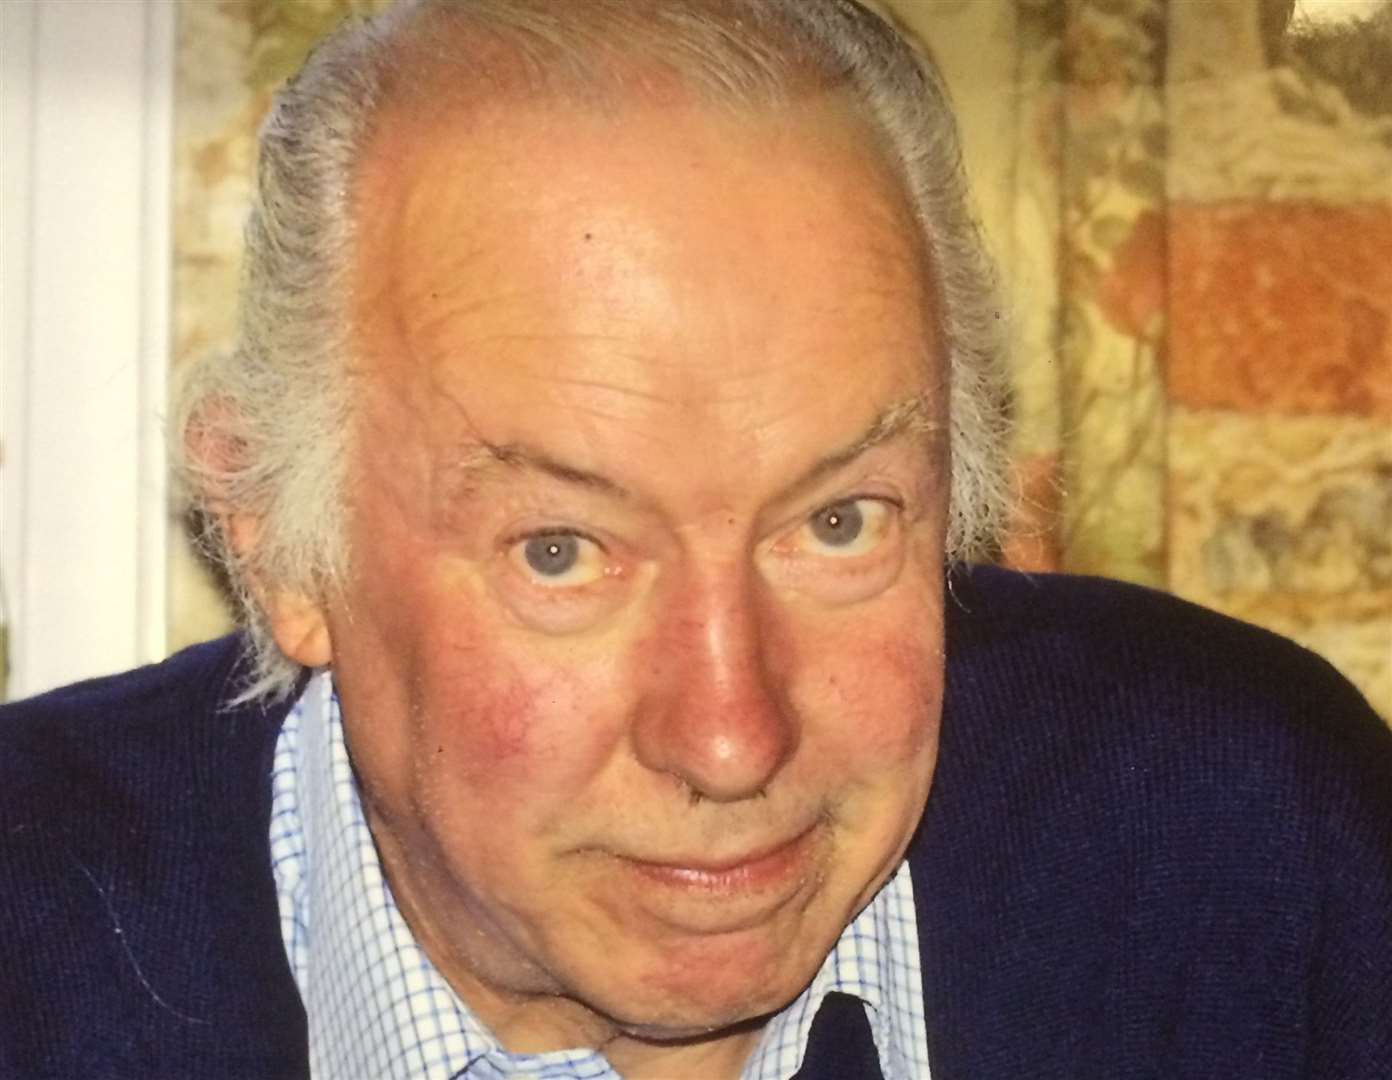 Roy Blackman was bludgeoned to death at his home in Biddenden